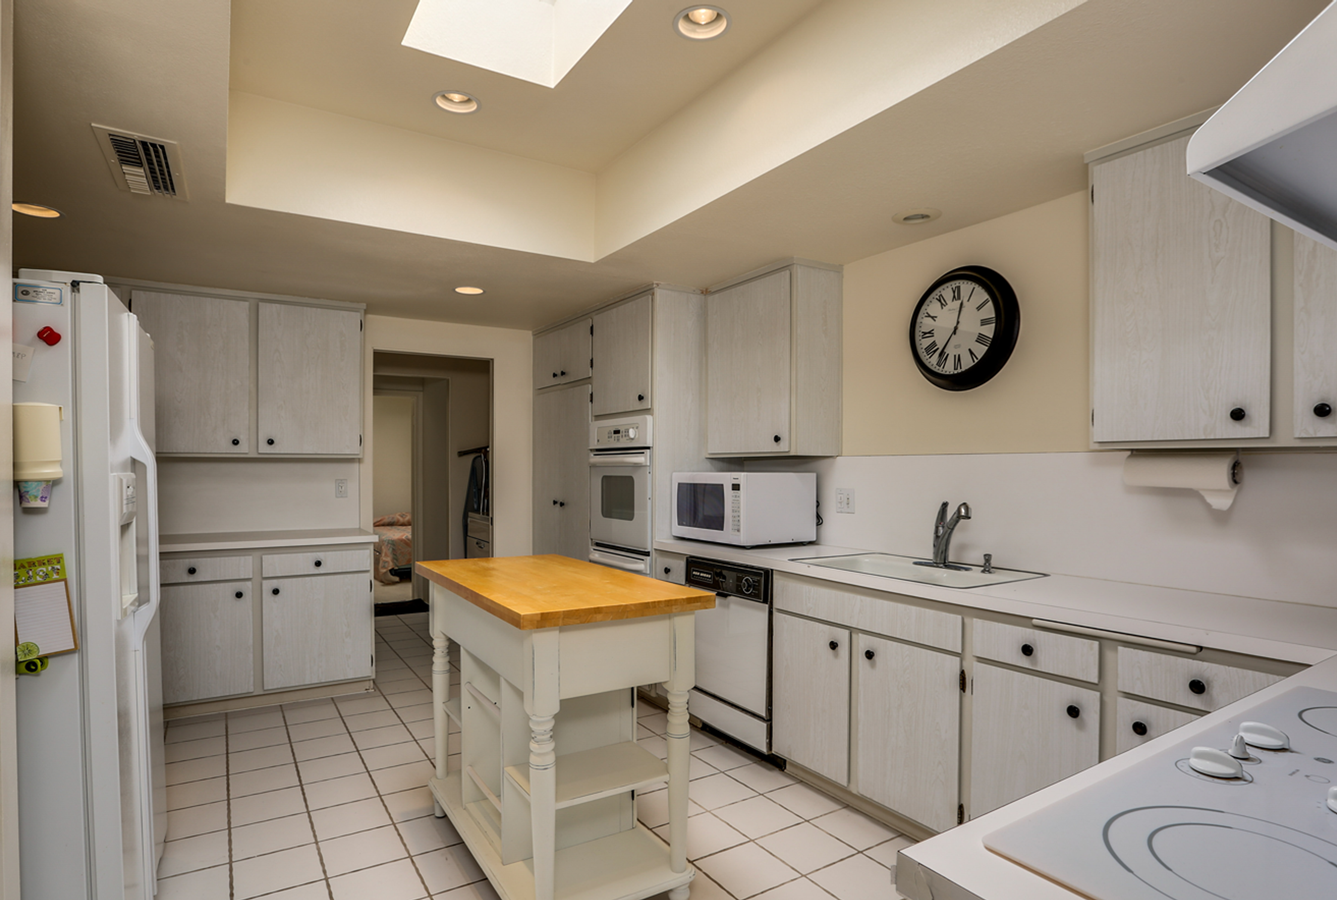 A kitchen with white cabinets and a clock on the wall